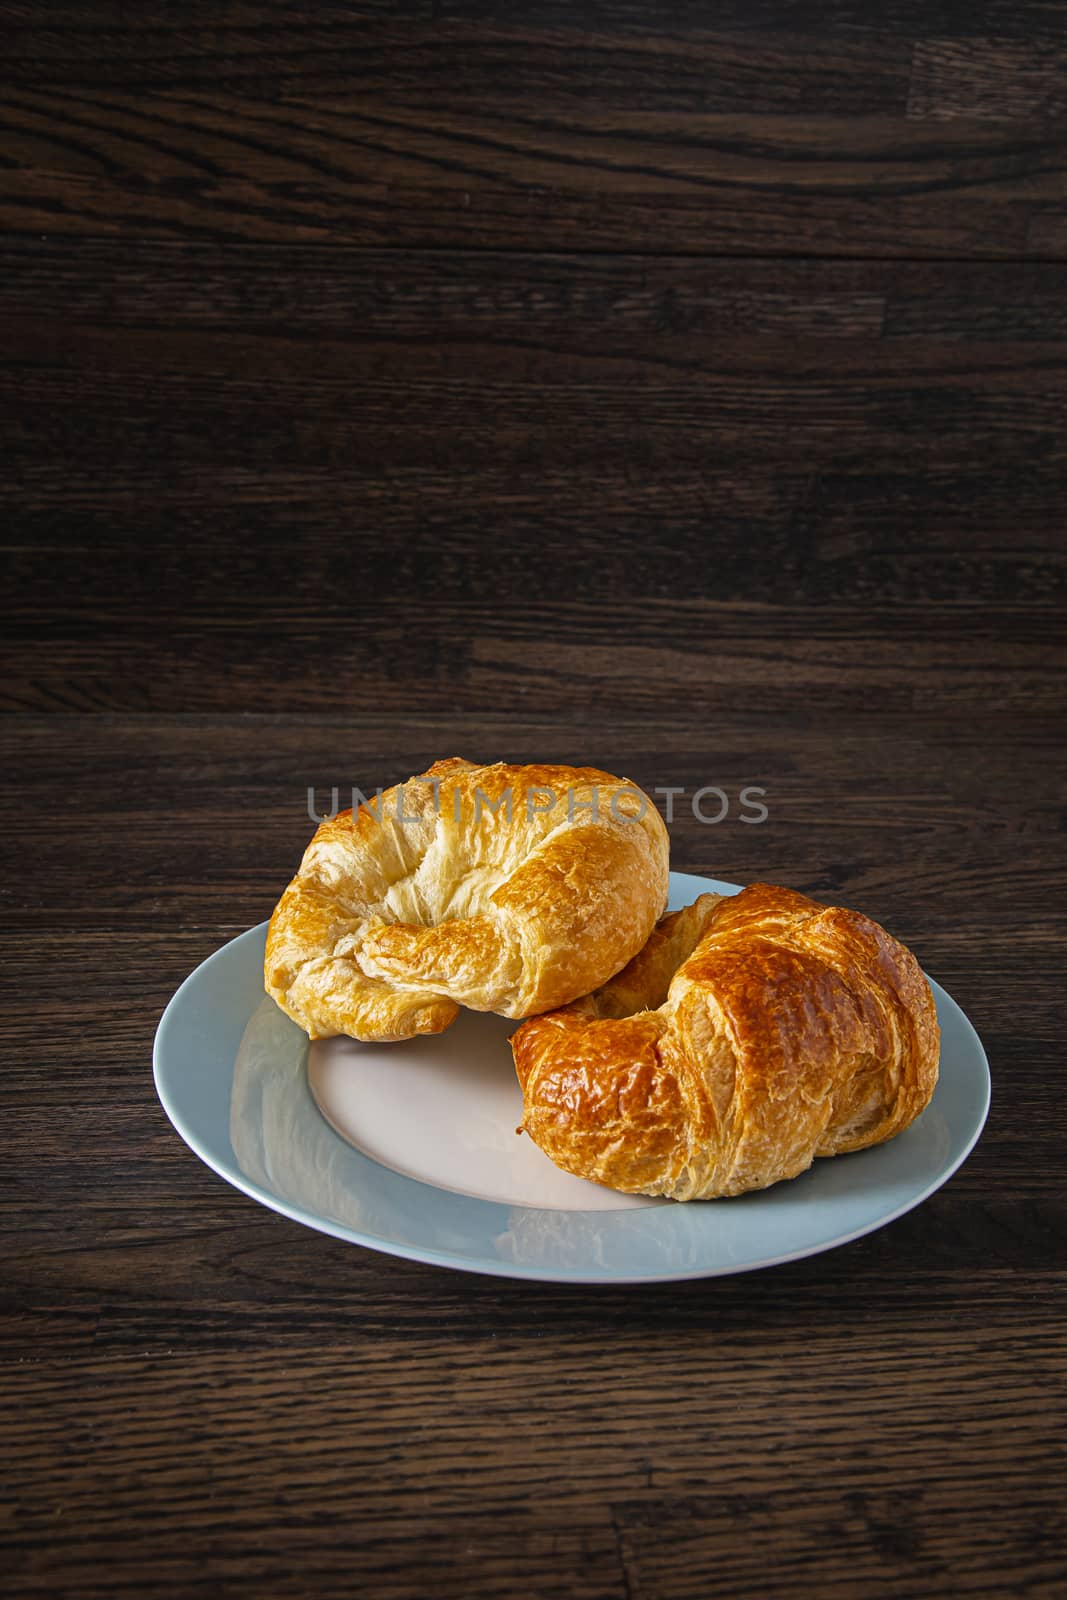 Plate of croissant by mypstudio